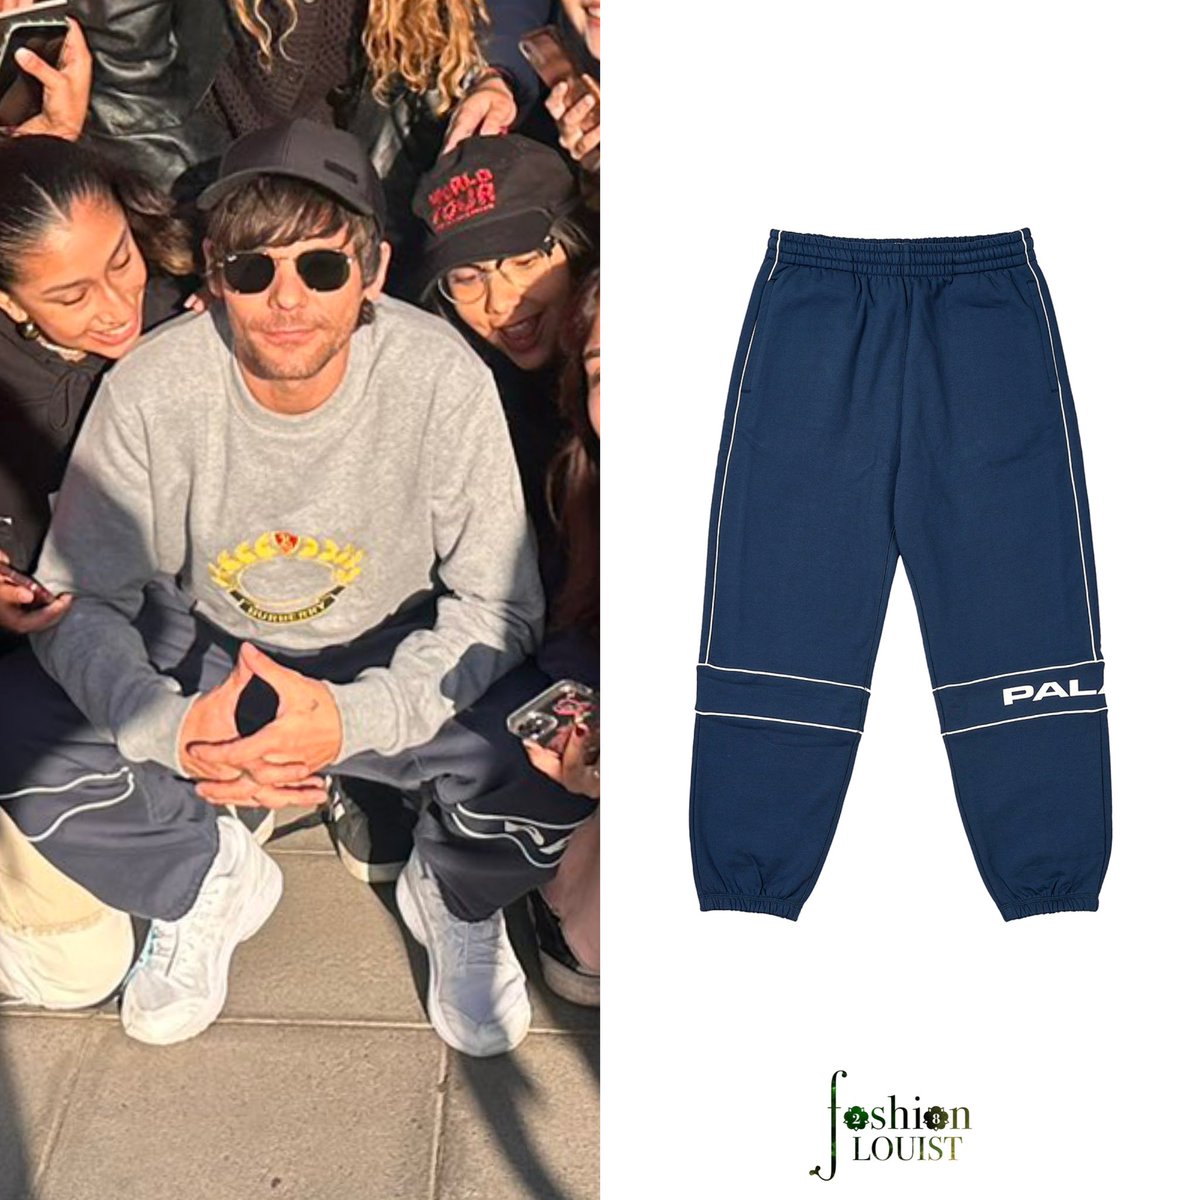 Louis wore Palace Skateboards Track Joggers in Navy while meeting fans at the airport in Chile. — goat.com/en-ca/apparel/…